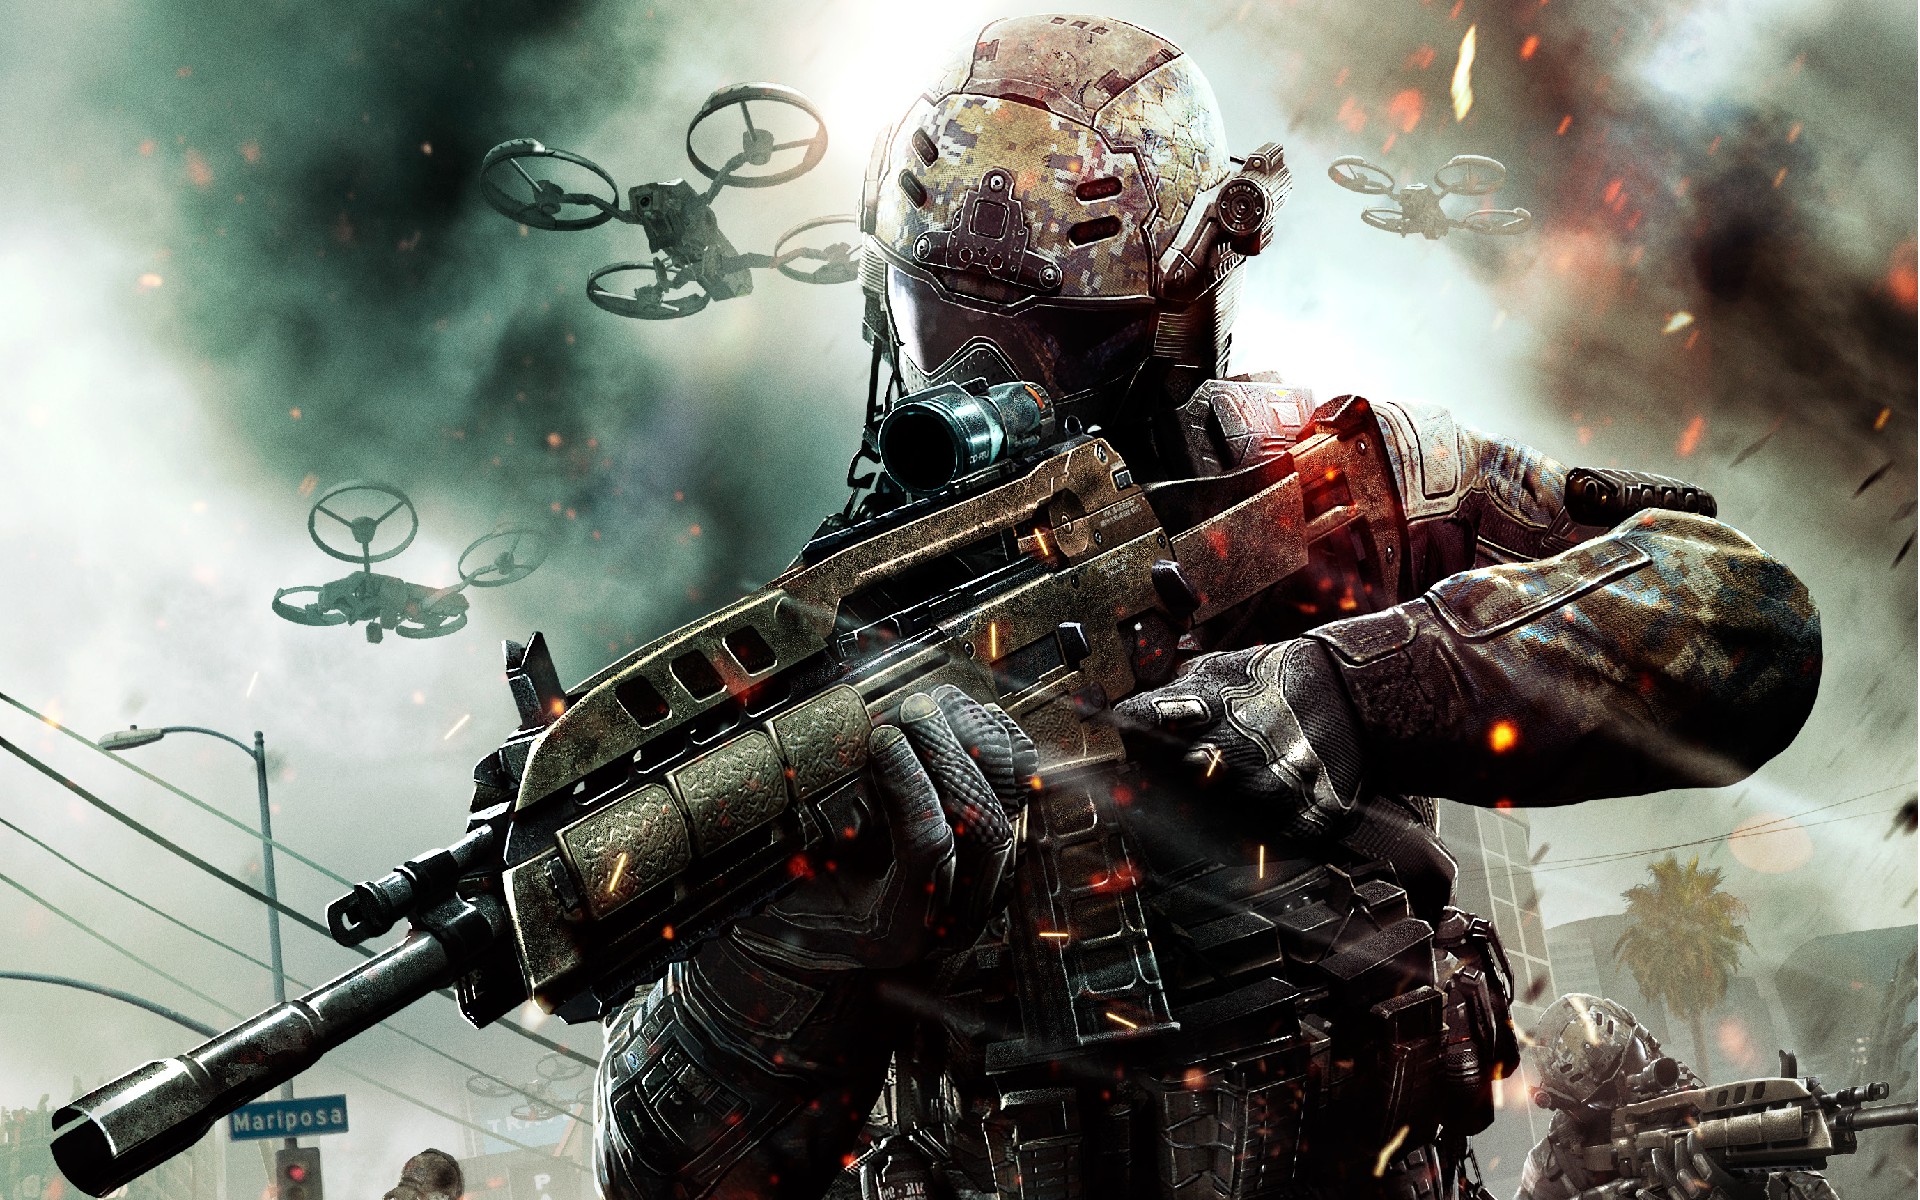 Awesome Black Ops 2 Wallpapers | Black Ops 2 Wallpapers